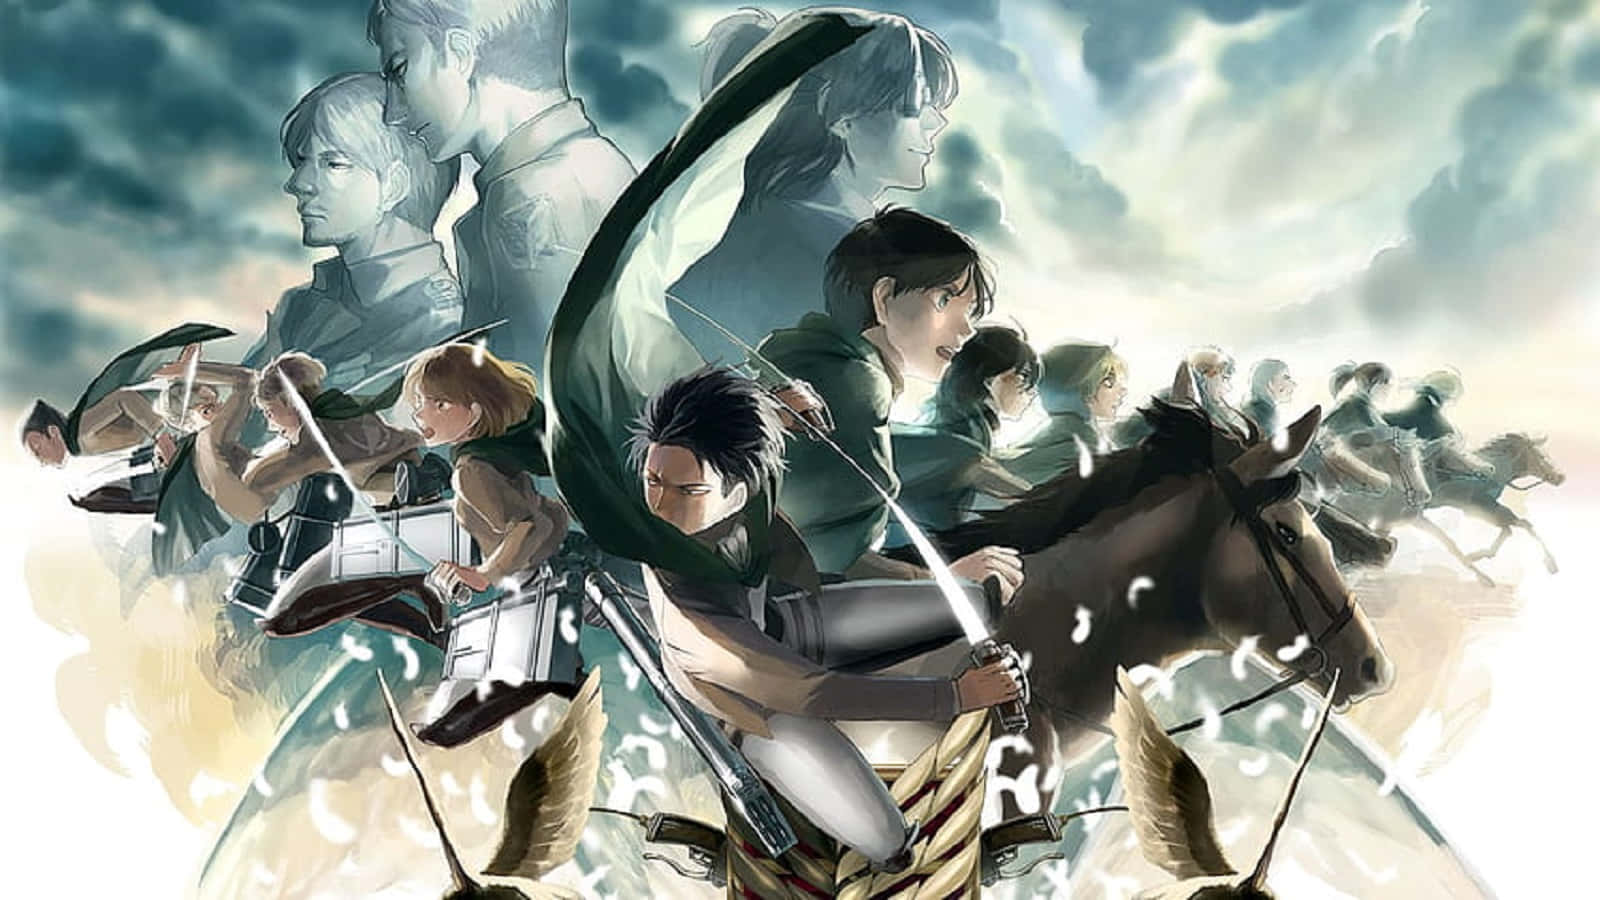 Join the Survey Corps and protect the future of humanity Wallpaper